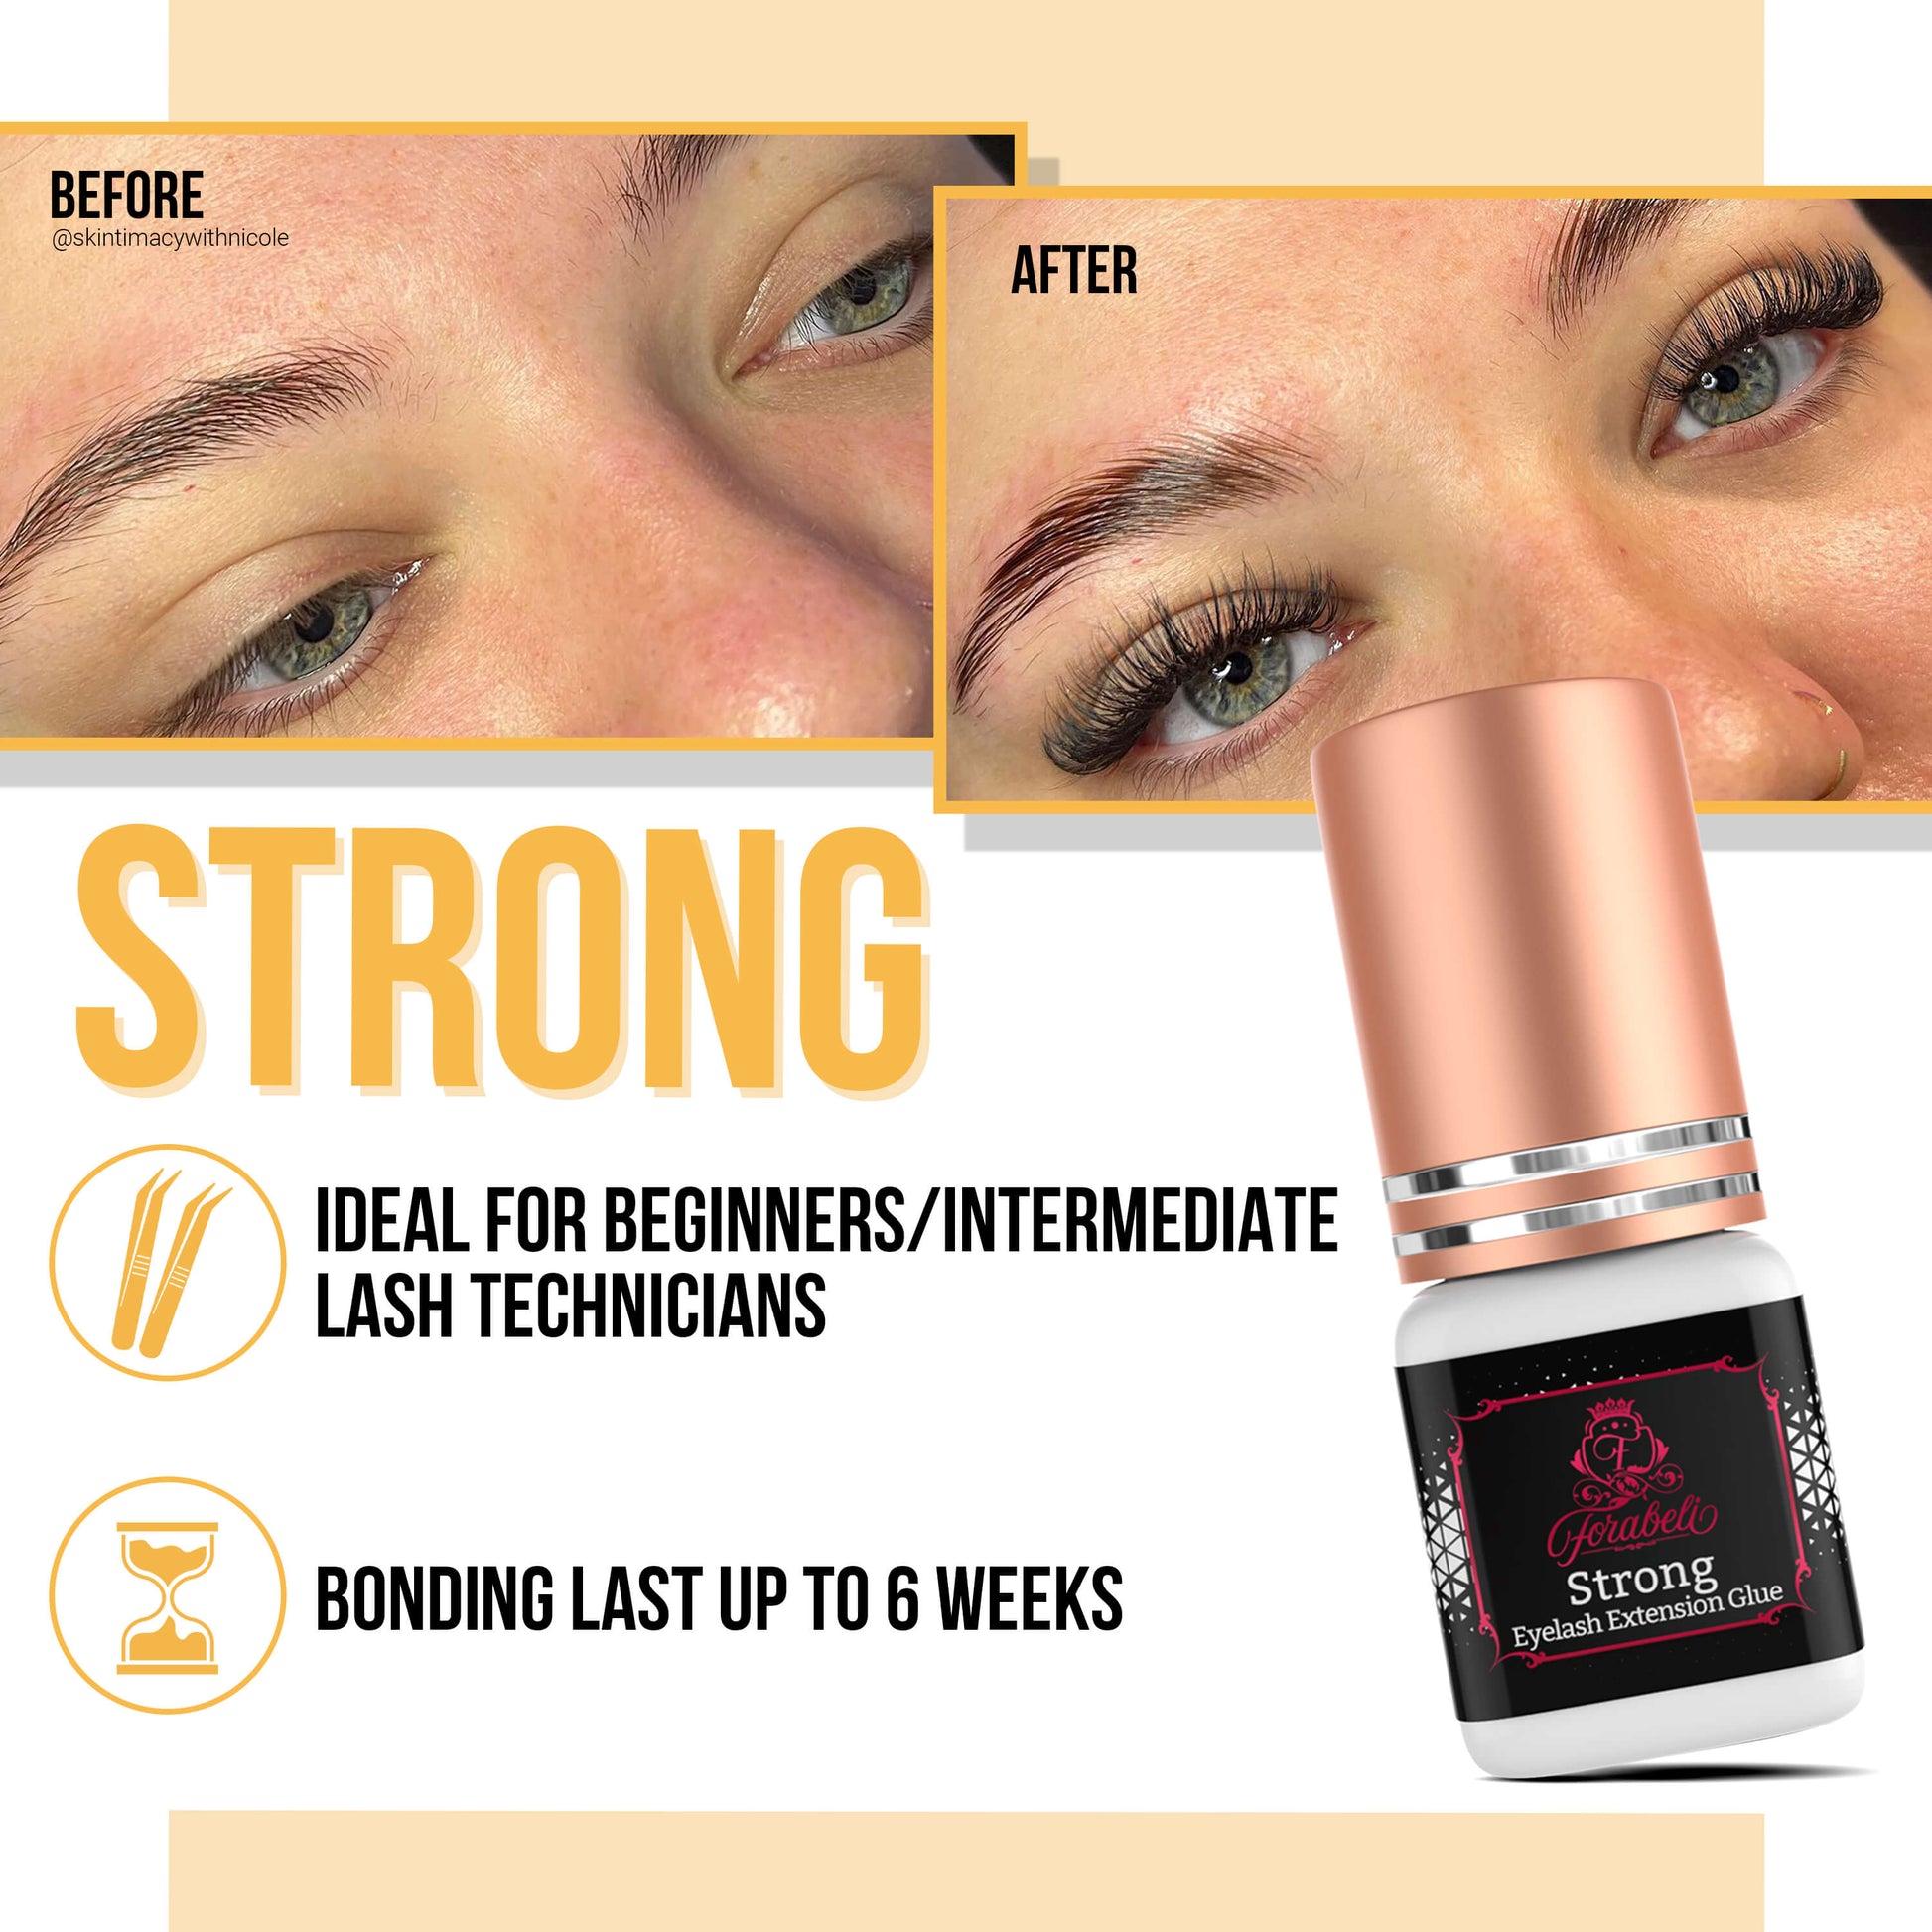 Suitable for lash technicians at beginner and intermediate levels, offering a bonding duration of up to 6 weeks.